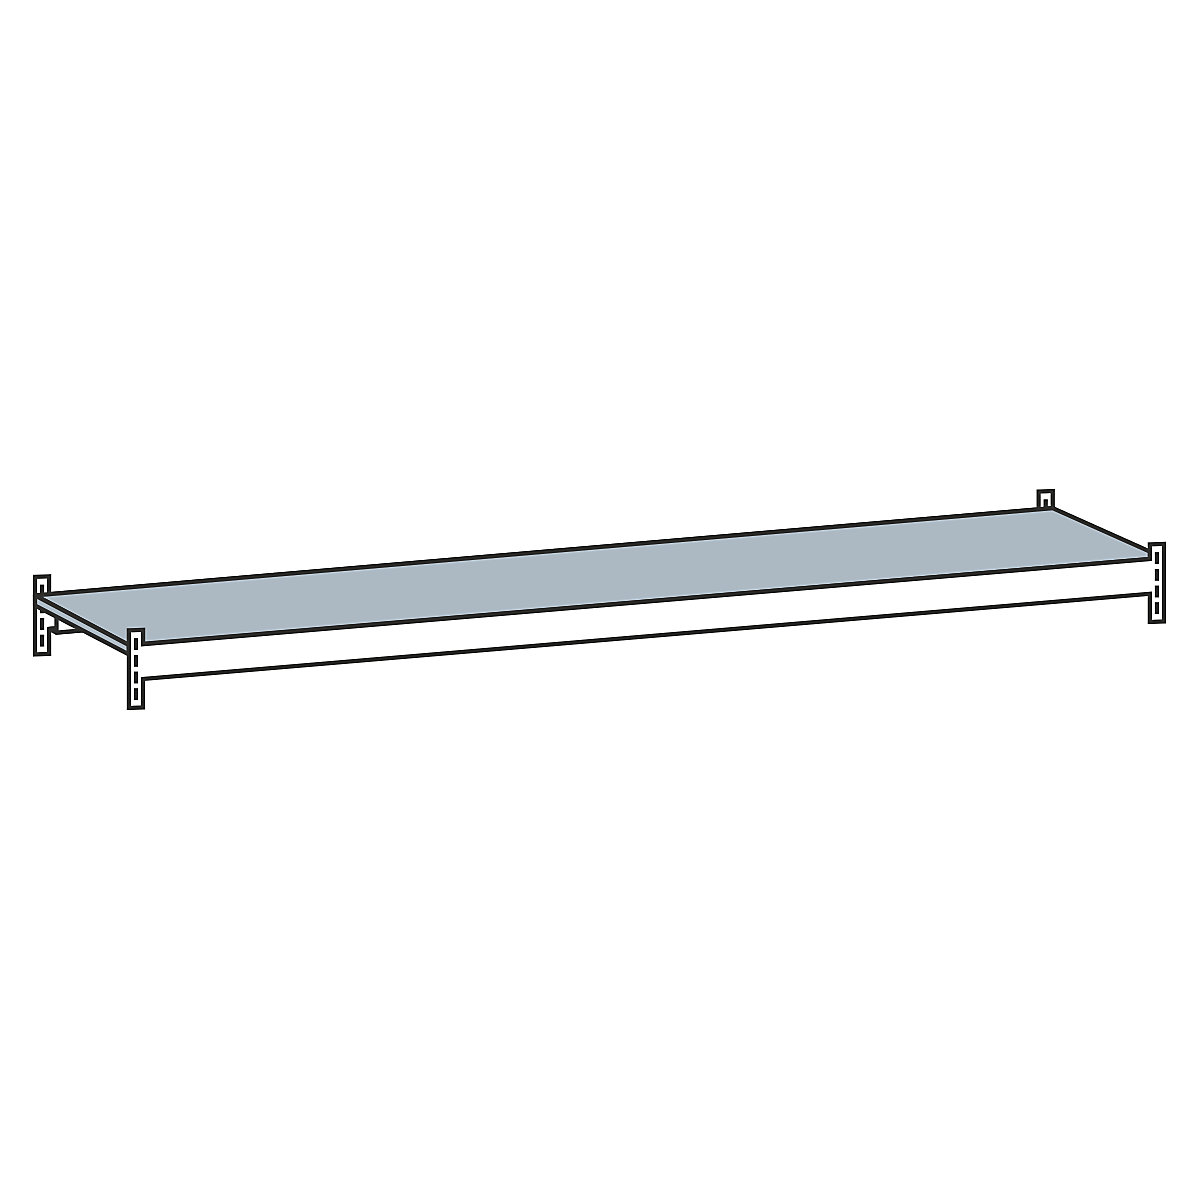 Additional level with steel shelf - SCHULTE